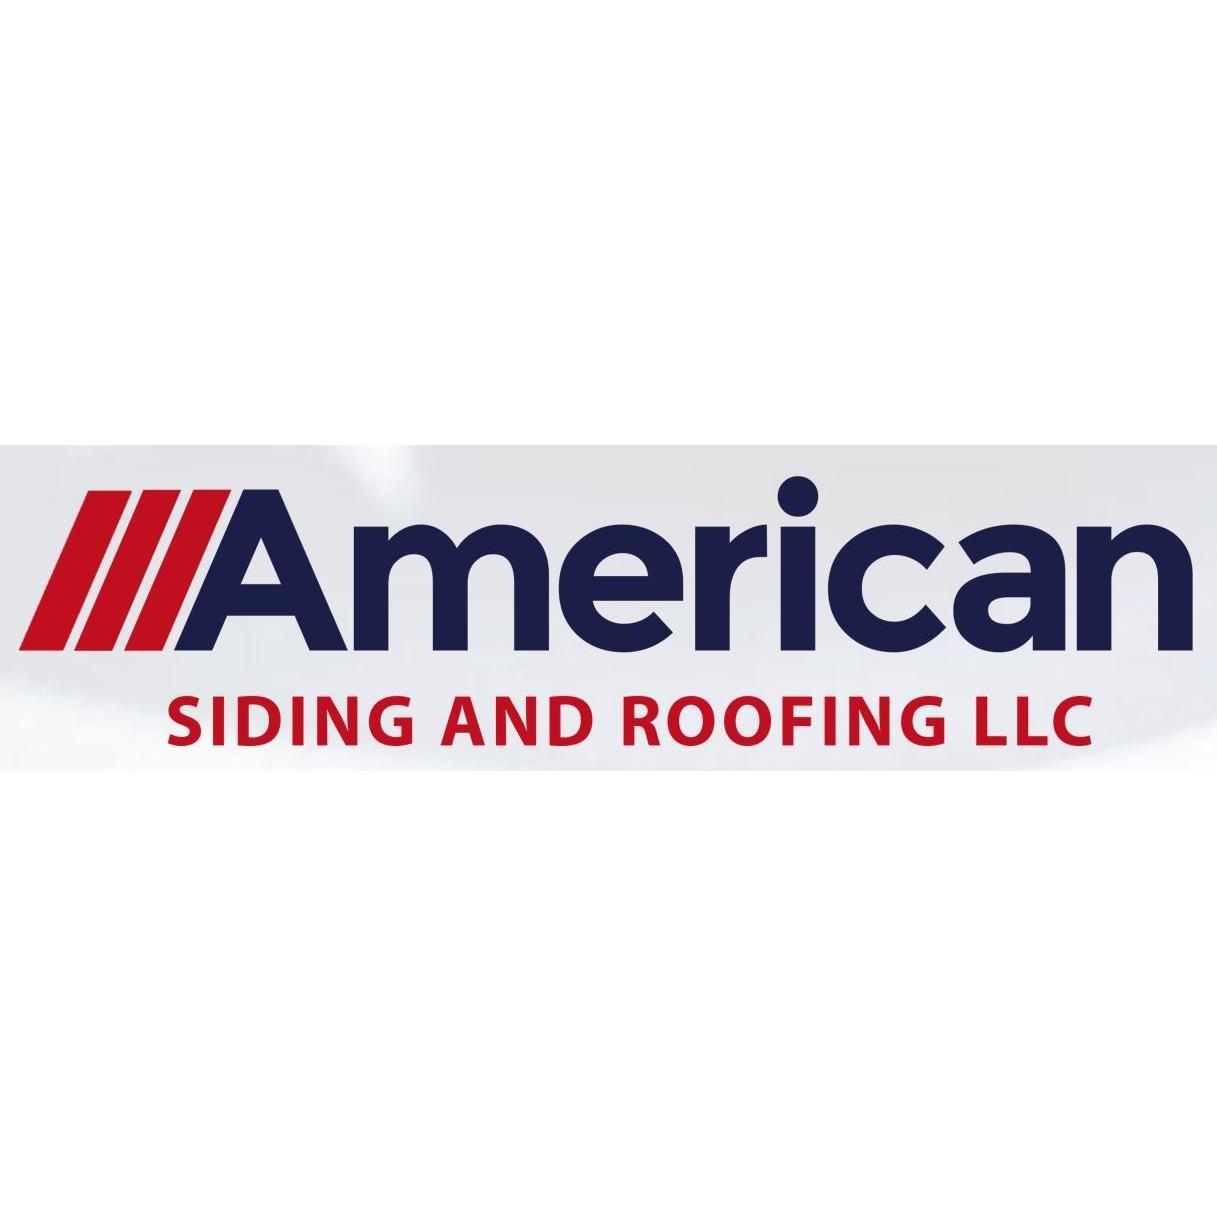 American Siding And Roofing, LLC. Logo